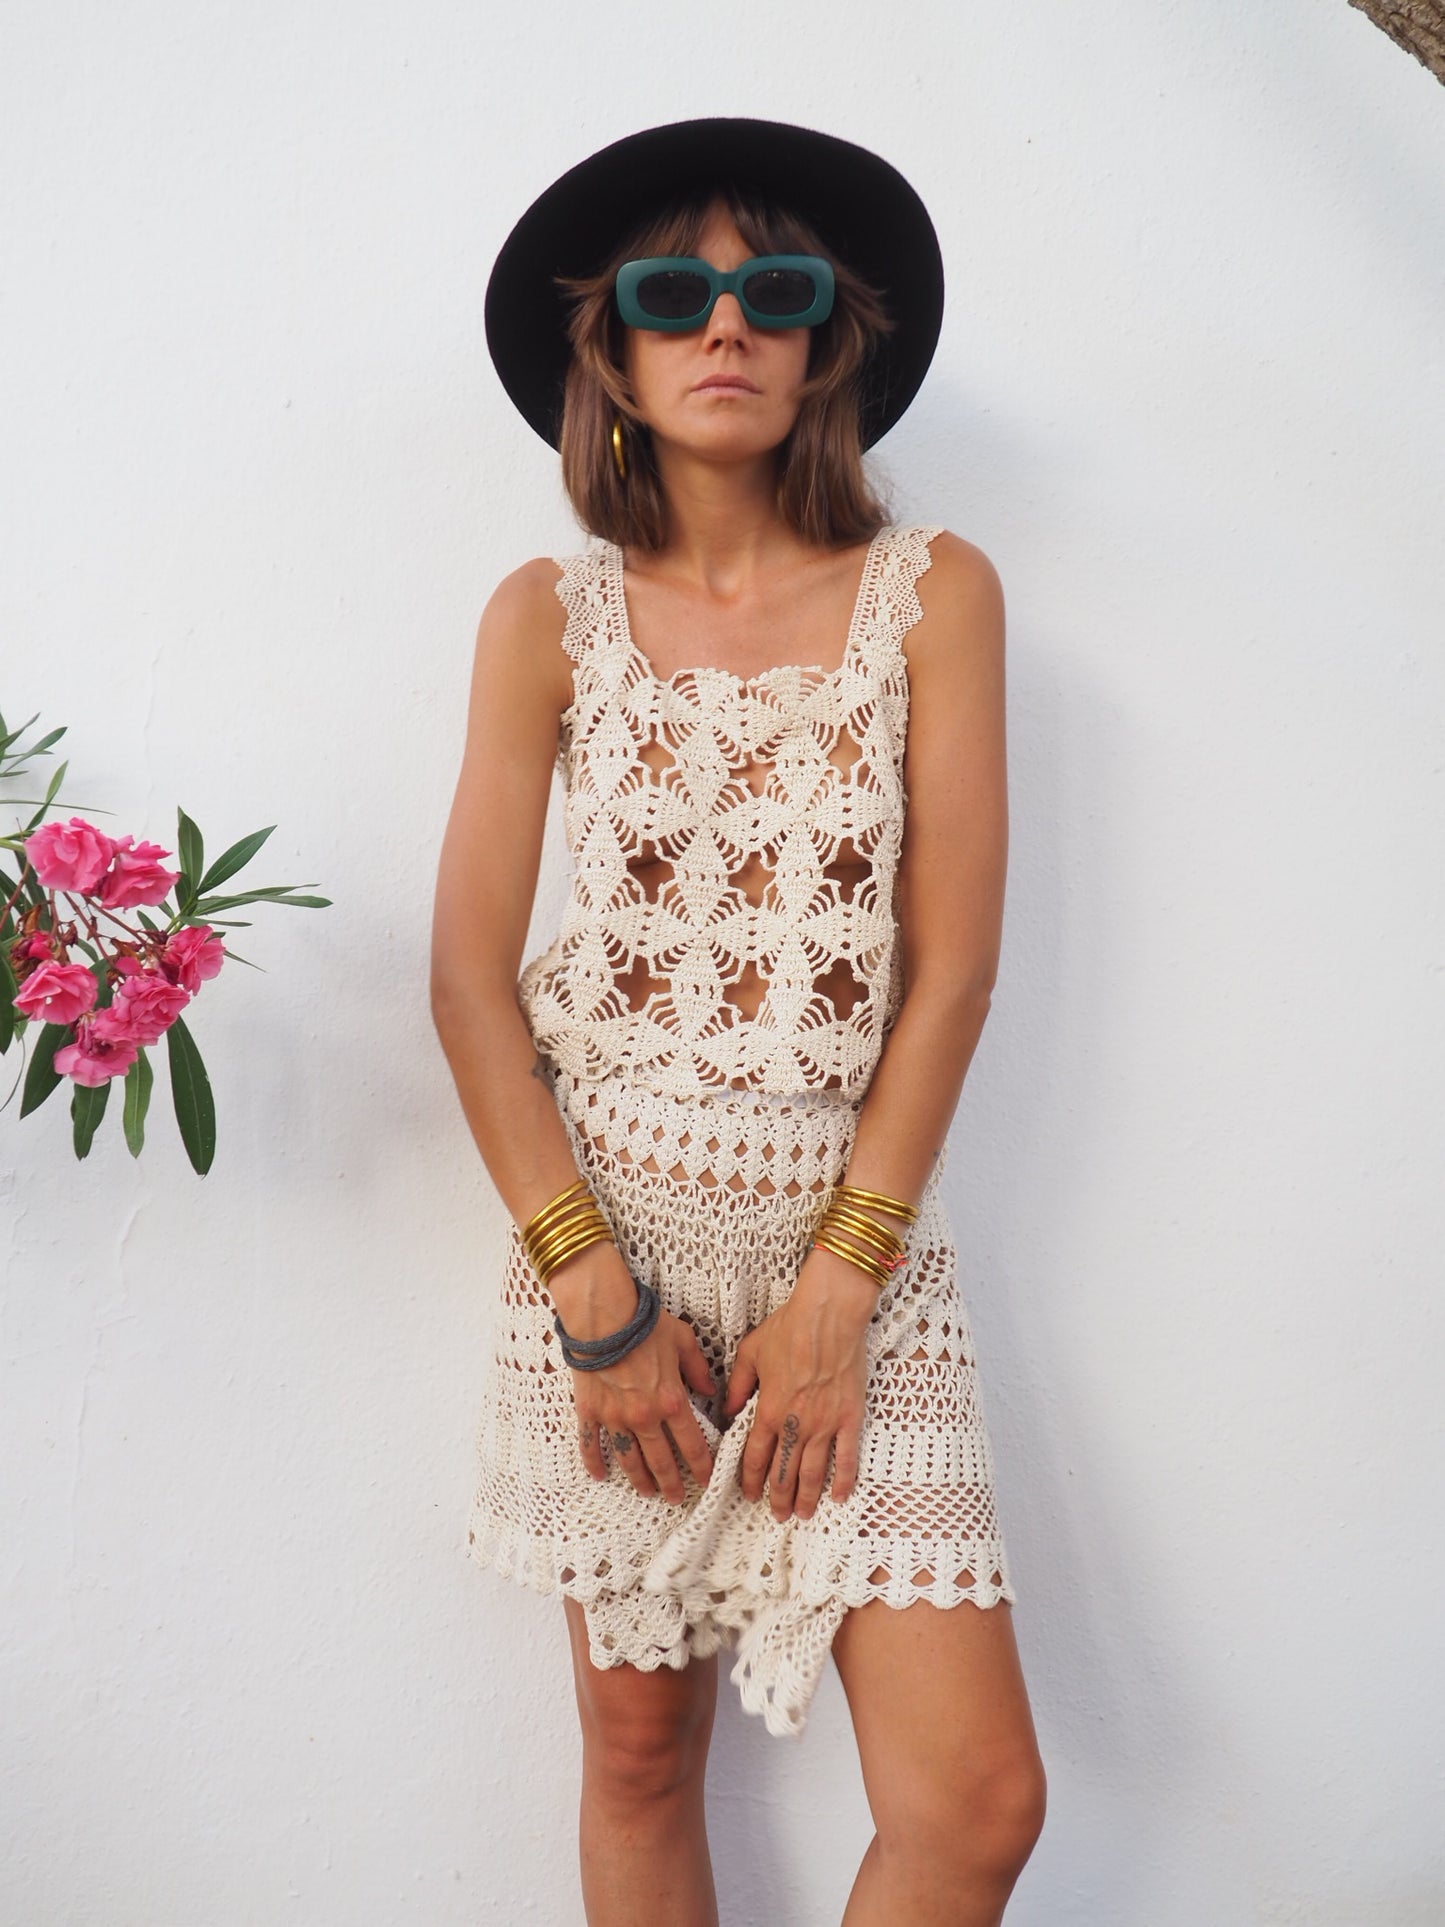 Amazing one of a kind cream vintage crochet lace top up-cycled by Vagabond Ibiza